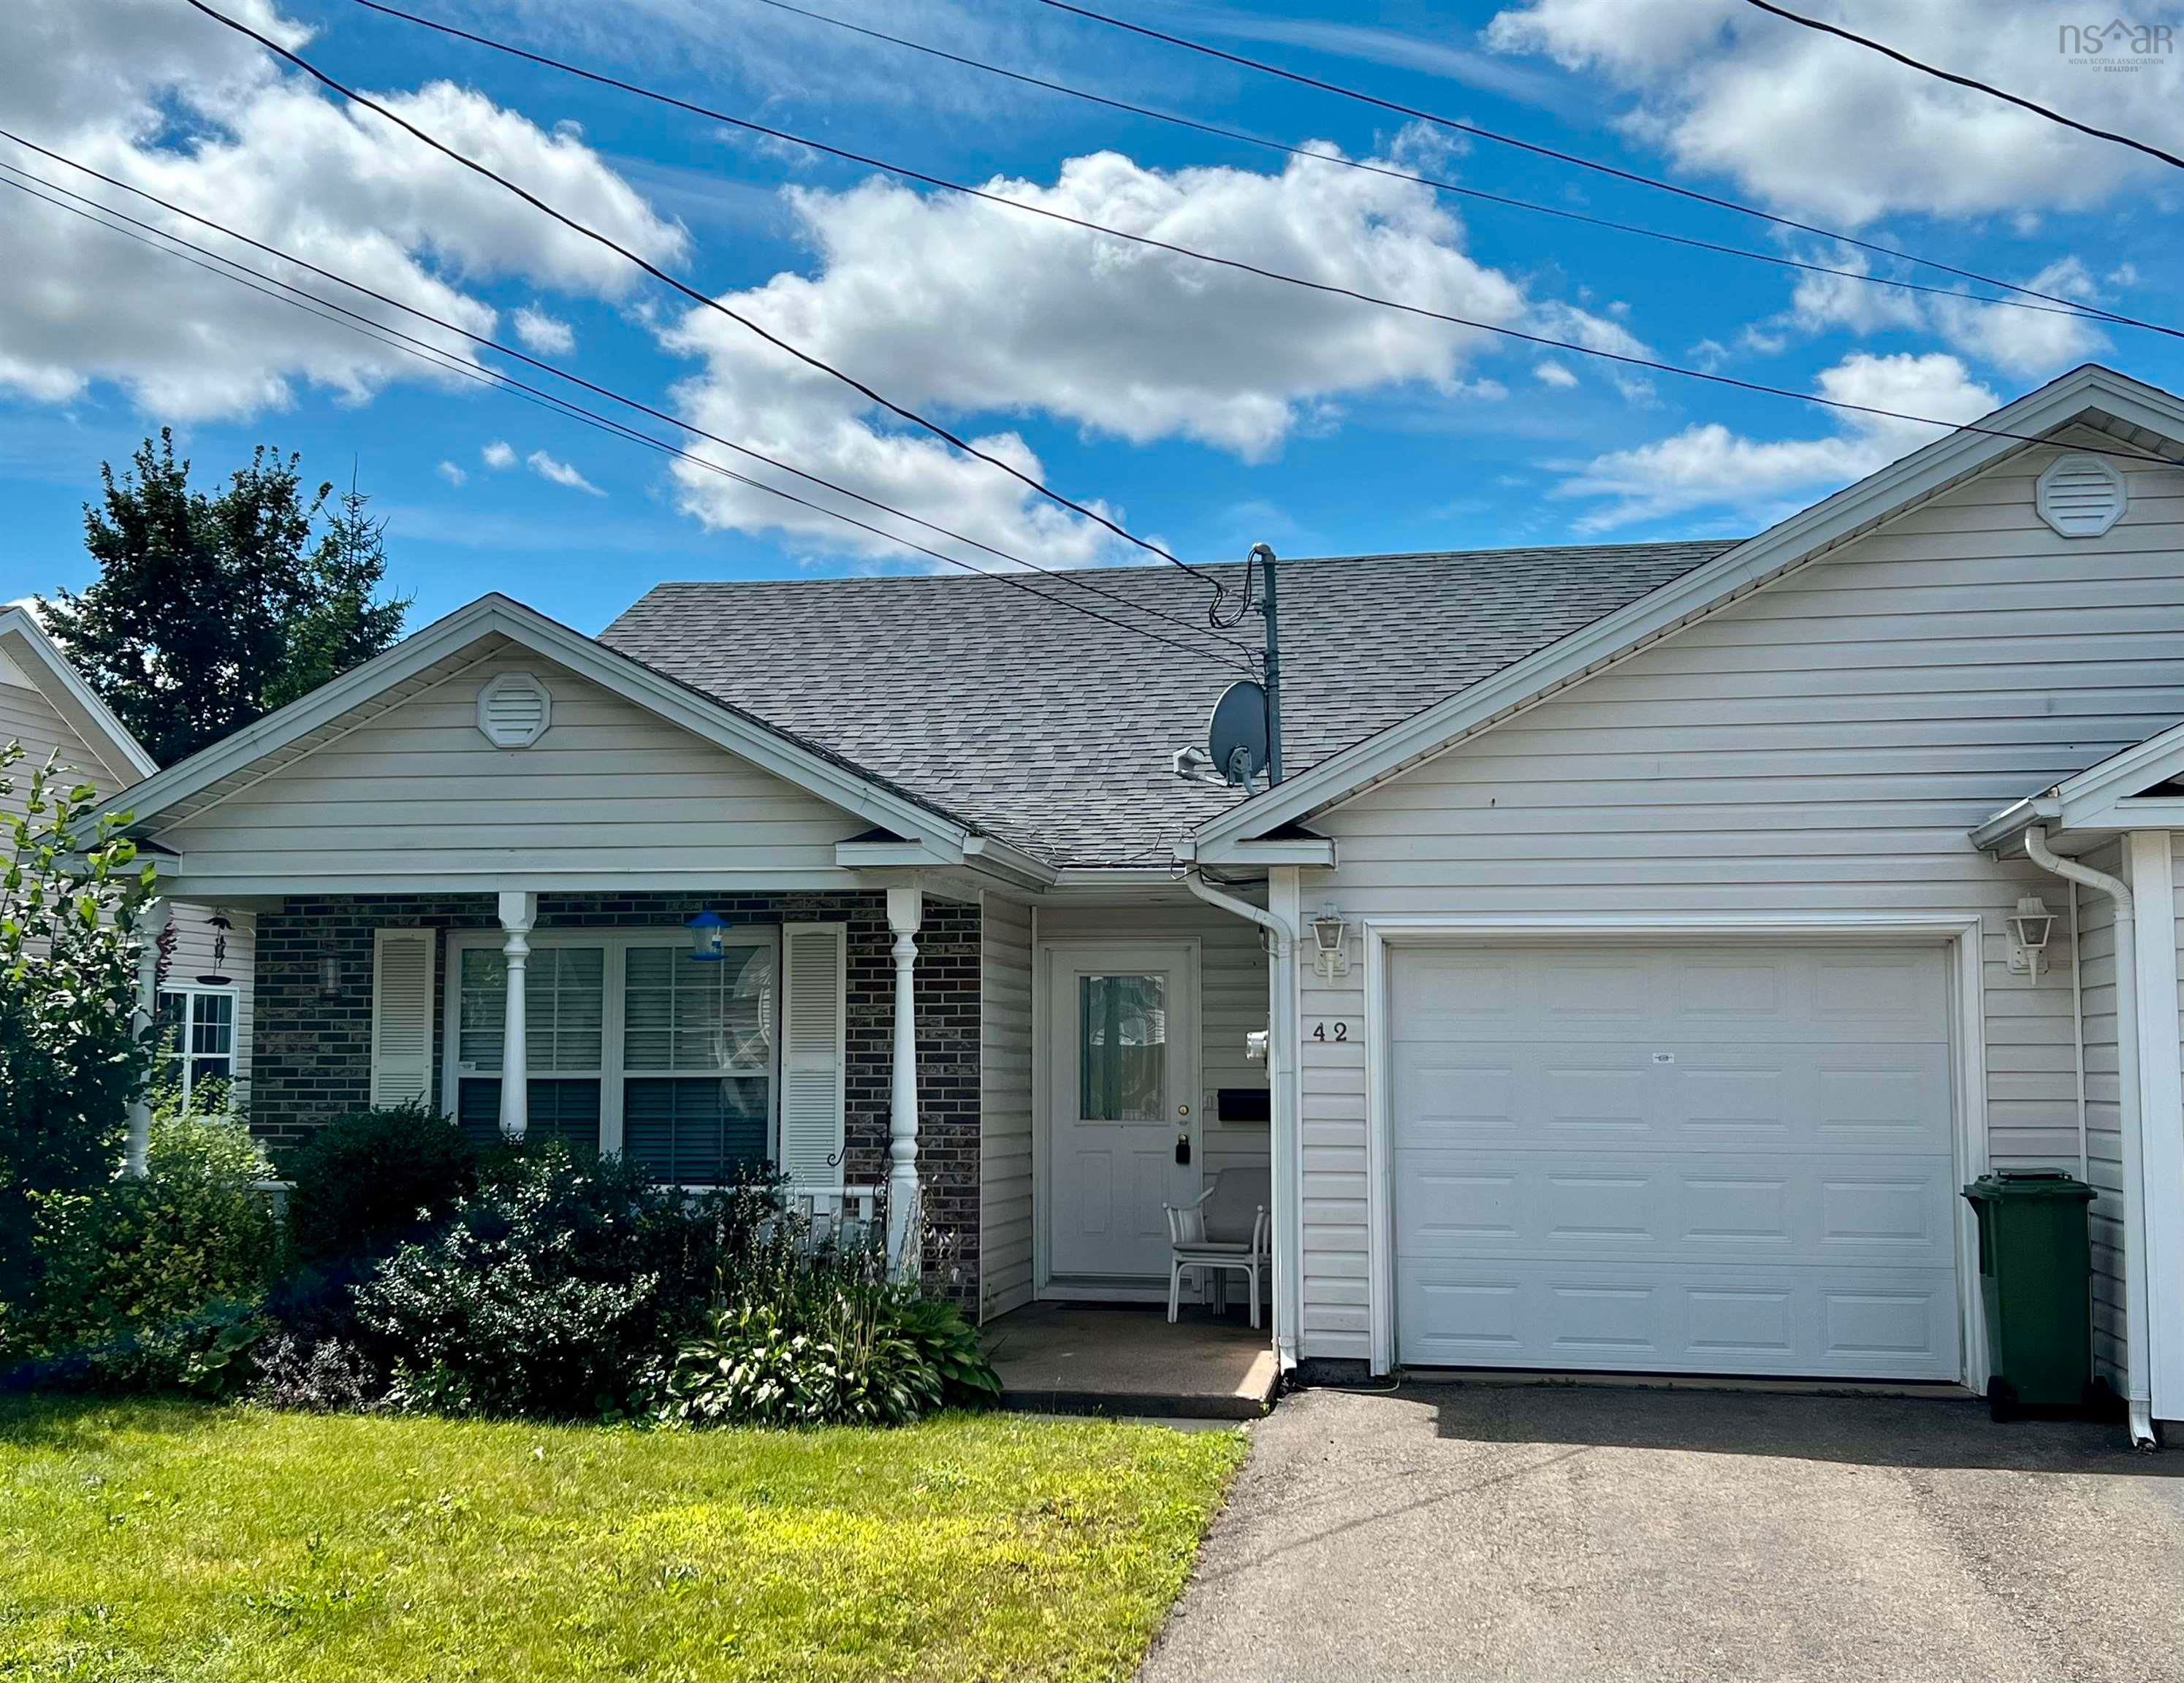 I have sold a property at 42 Cherry Lane in Wolfville
